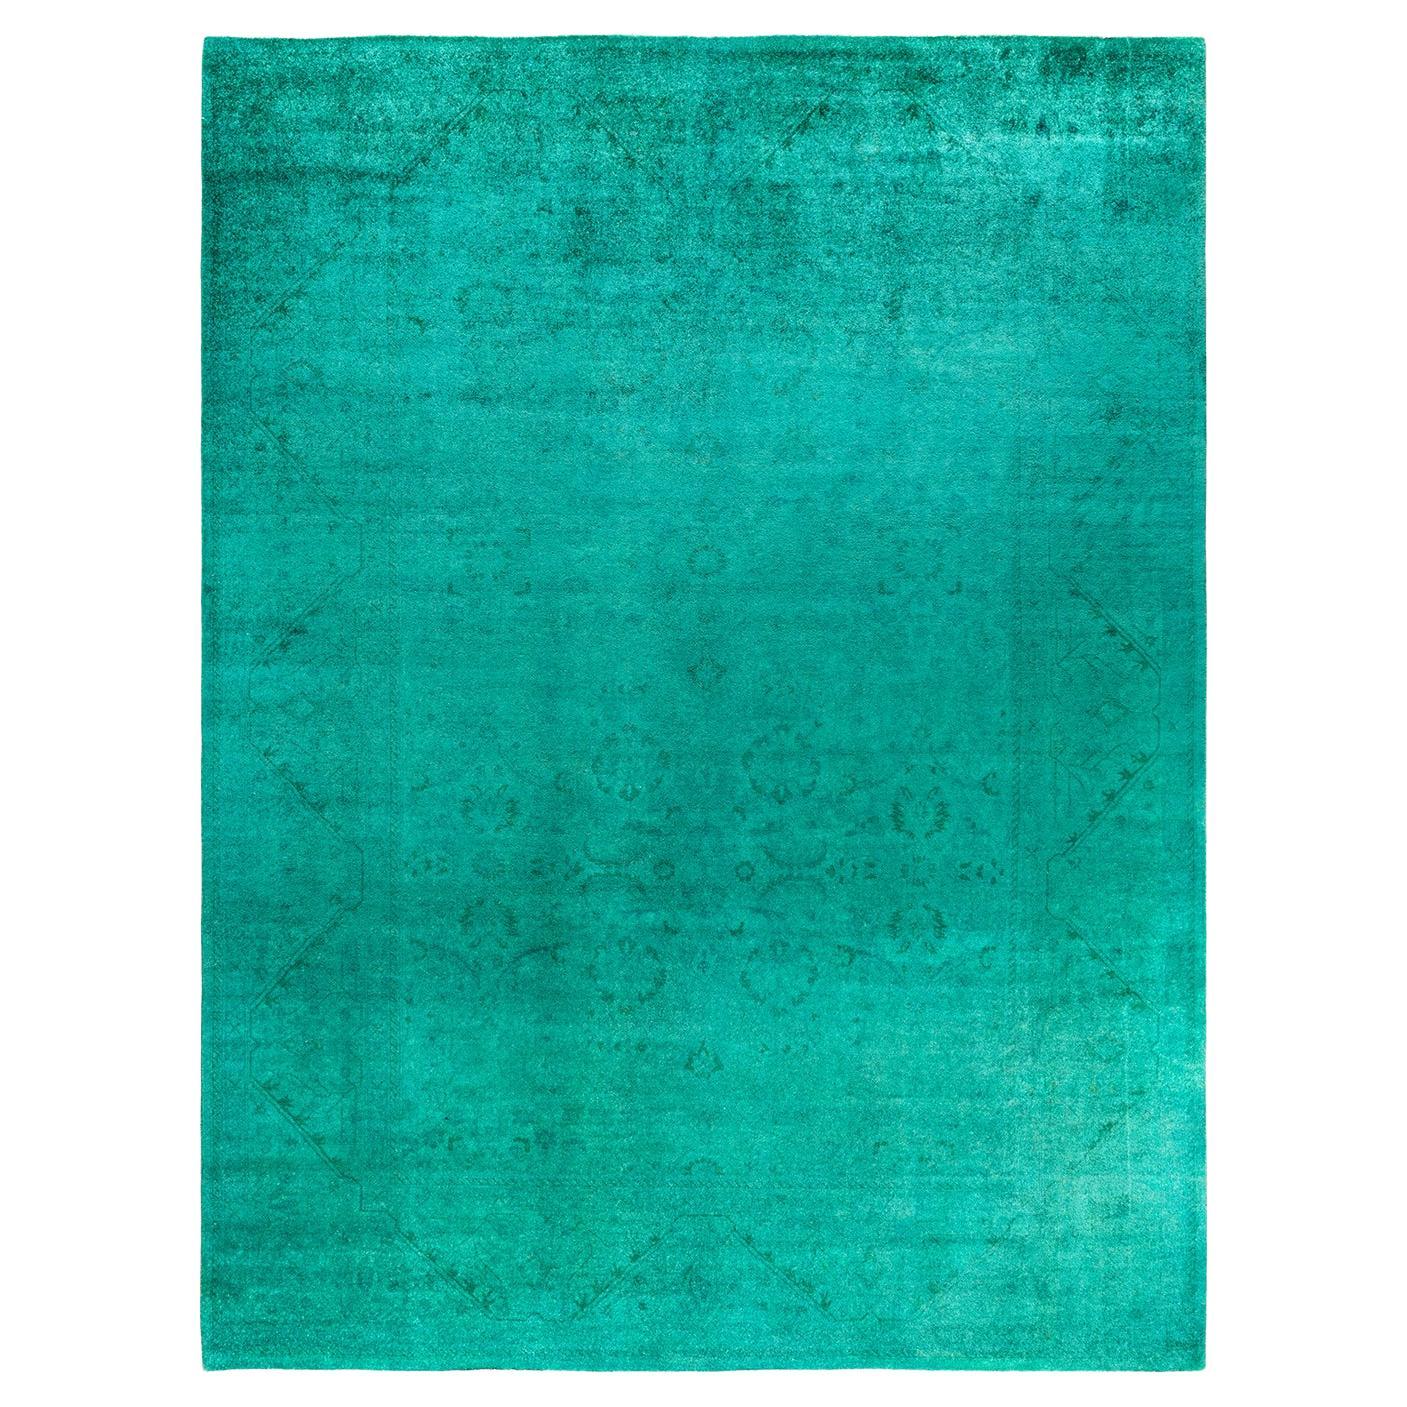 Contemporary Vibrance Hand Knotted Wool Green Area Rug